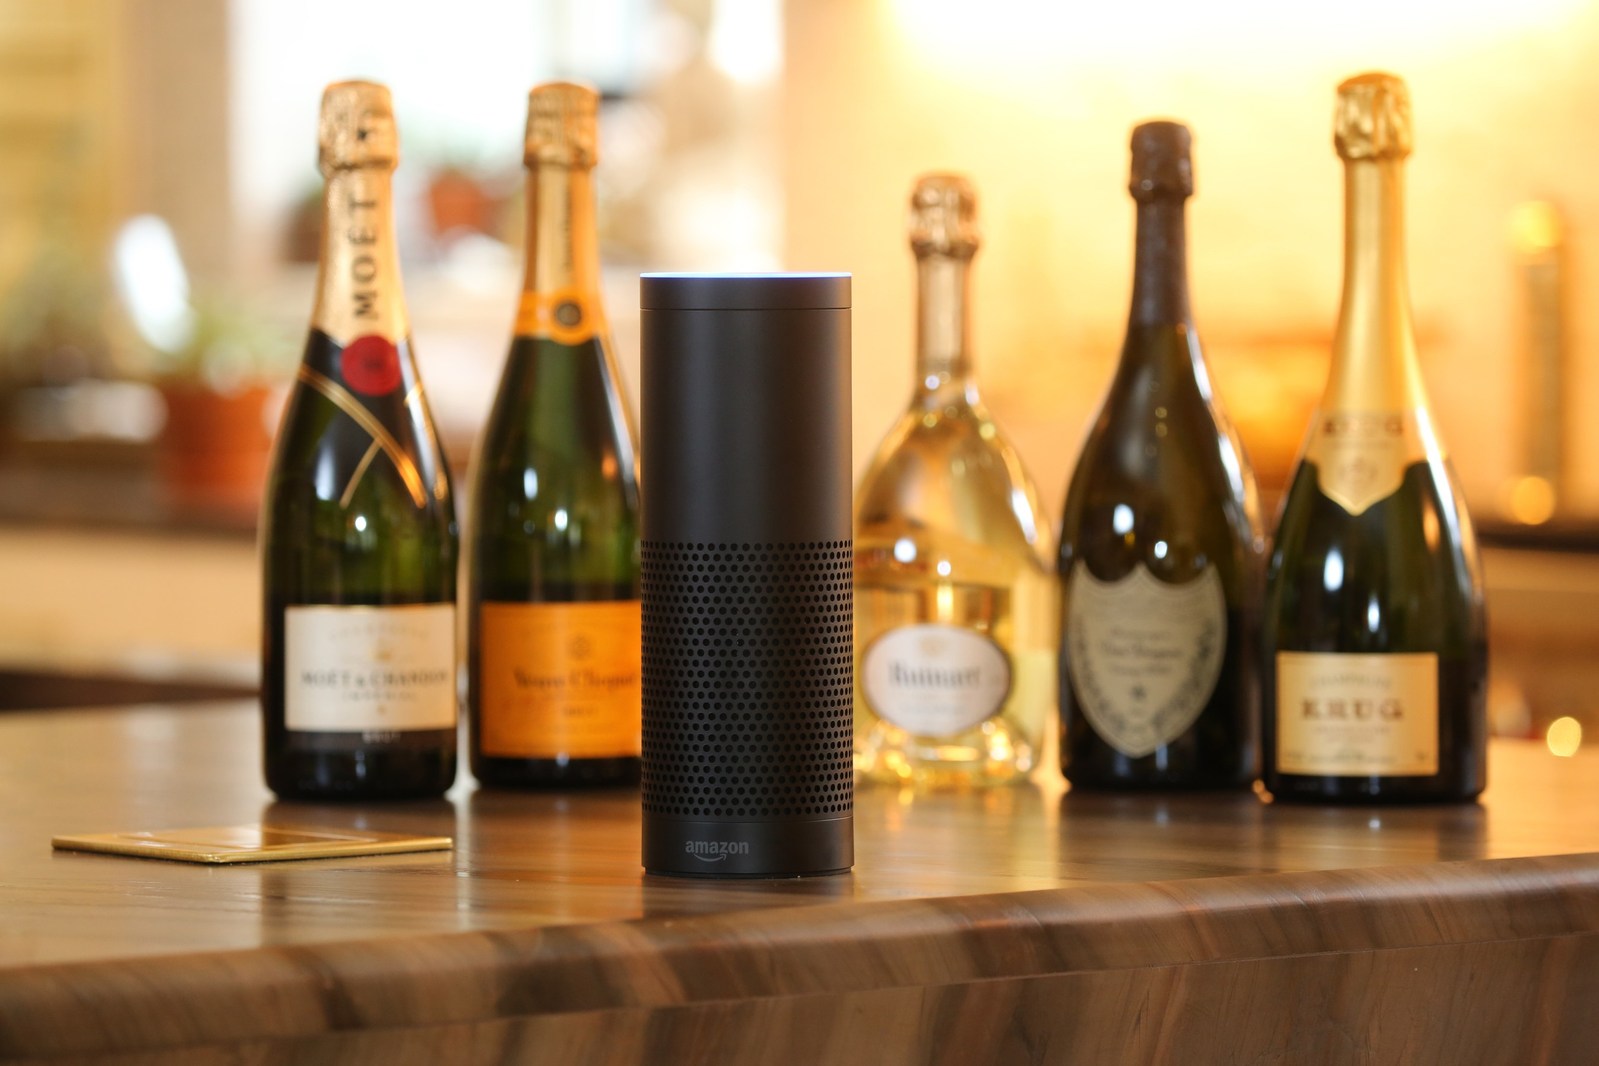 Moët Hennessy’s new Alexa skill will turn you into a champagne connoisseur